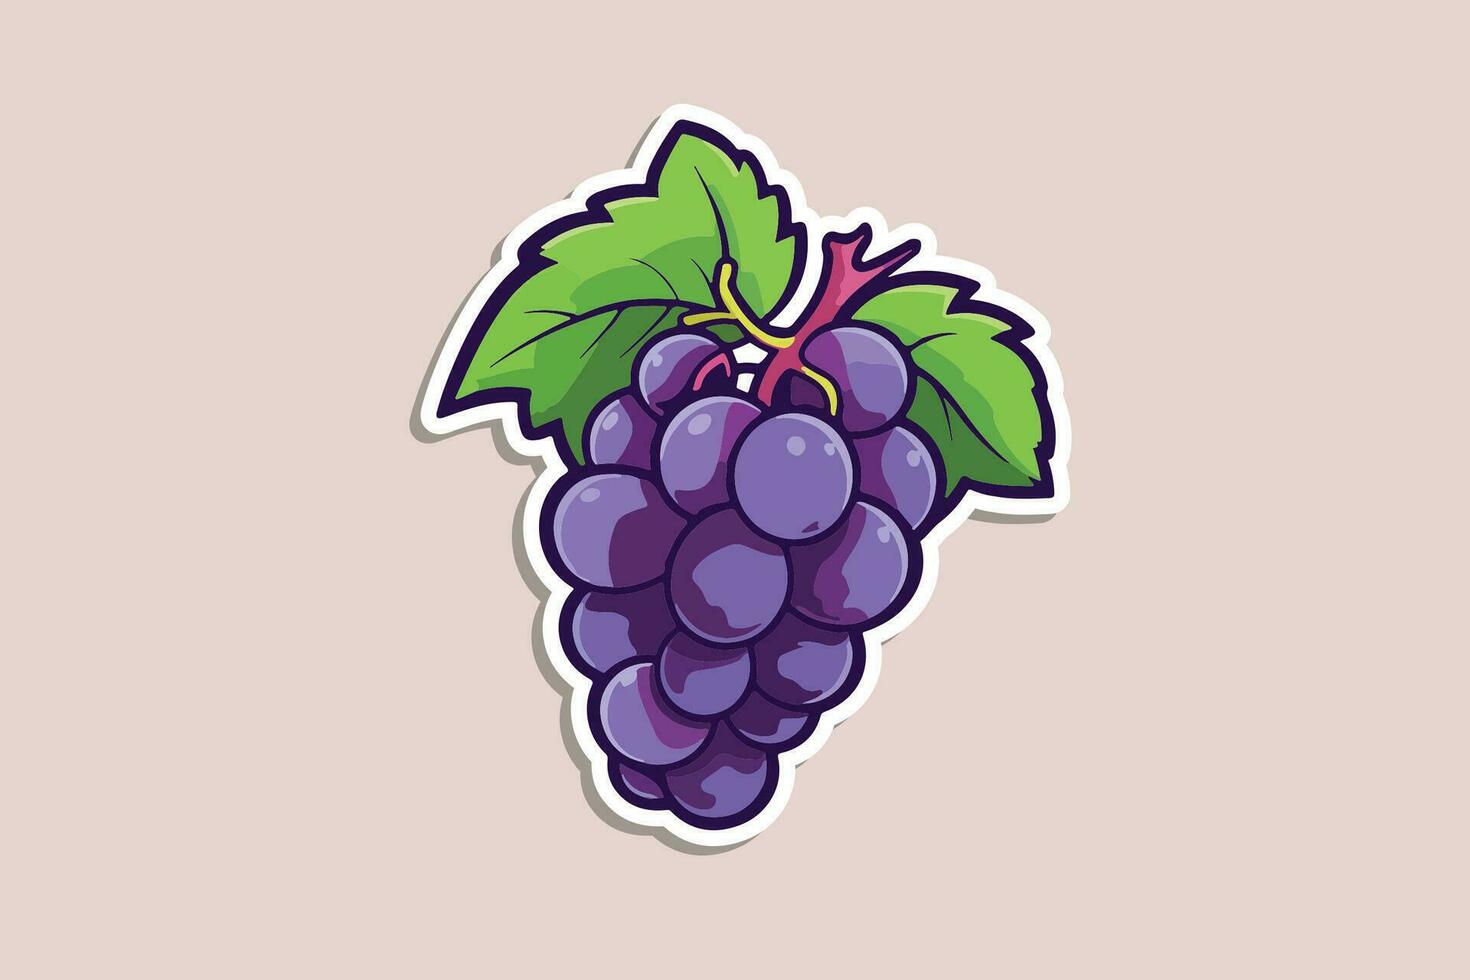 grapes sticker on a light background vector